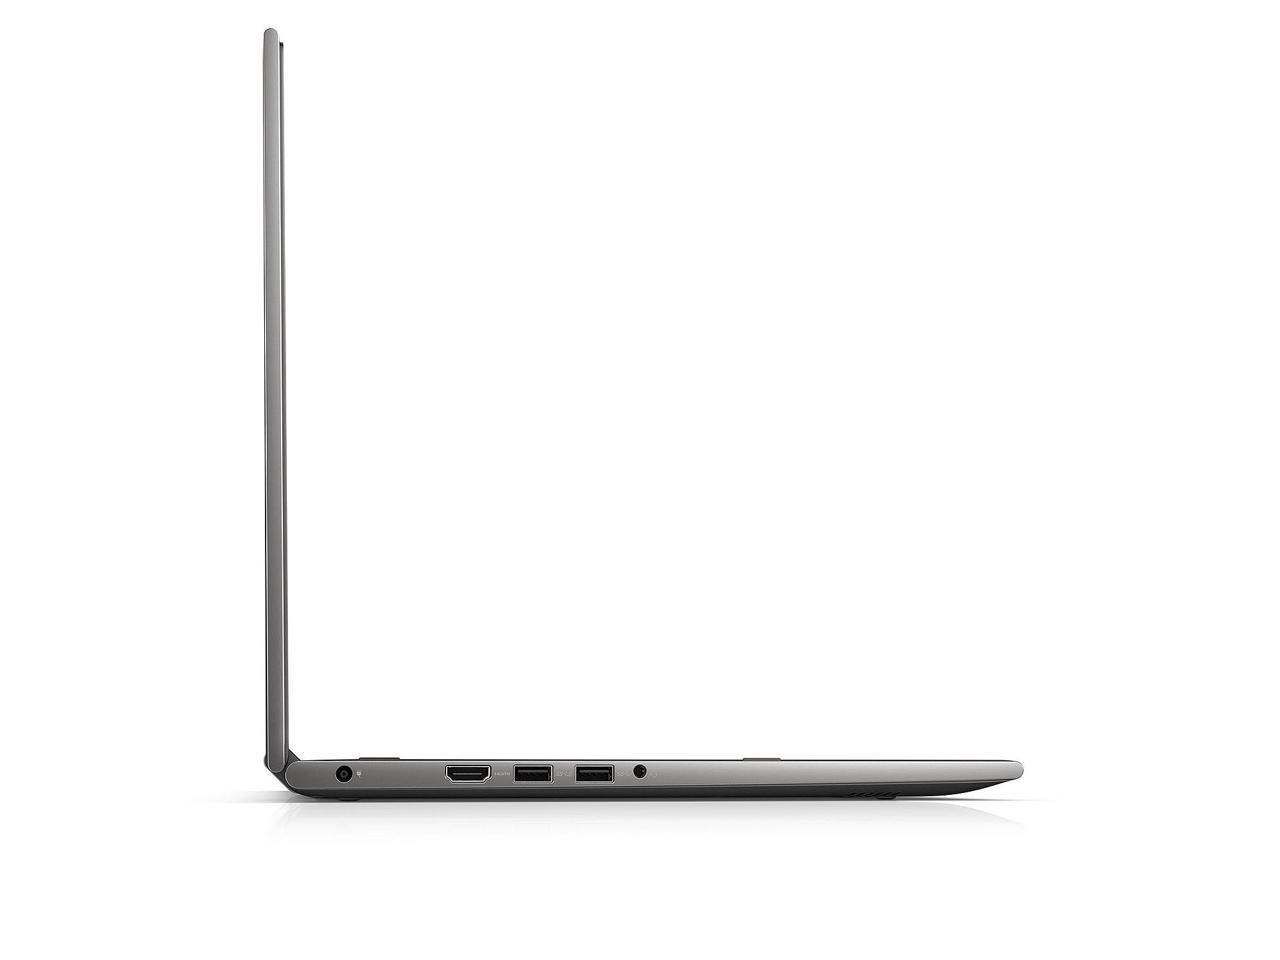 Dell Inspiron 15.6" 2-in-1 Touchscreen Notebook, Core i3-7100U, 8GB RAM, 1TB HDD